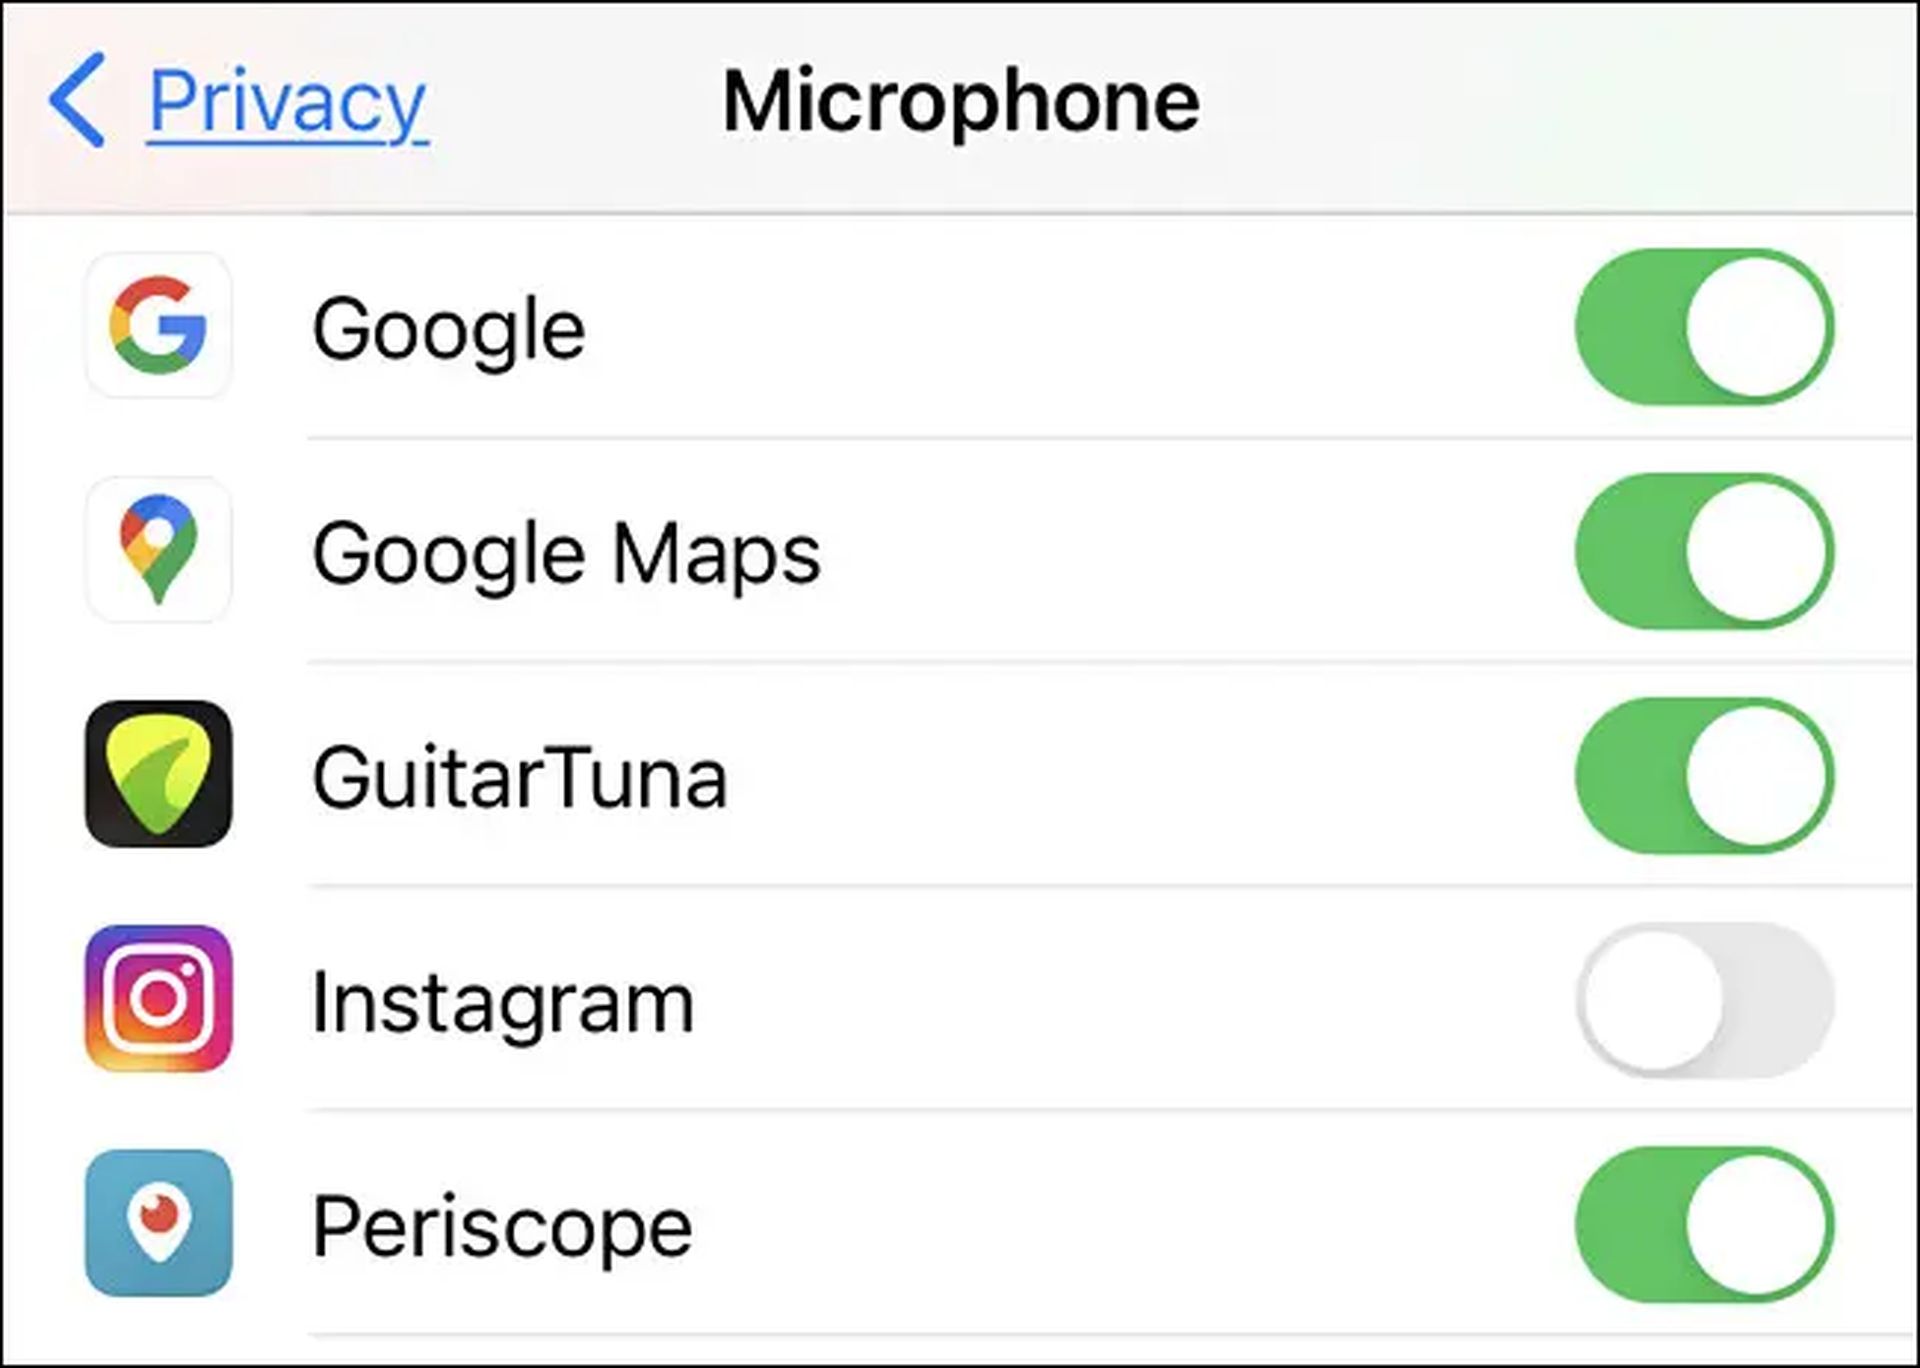 How to check microphone usage on iphone